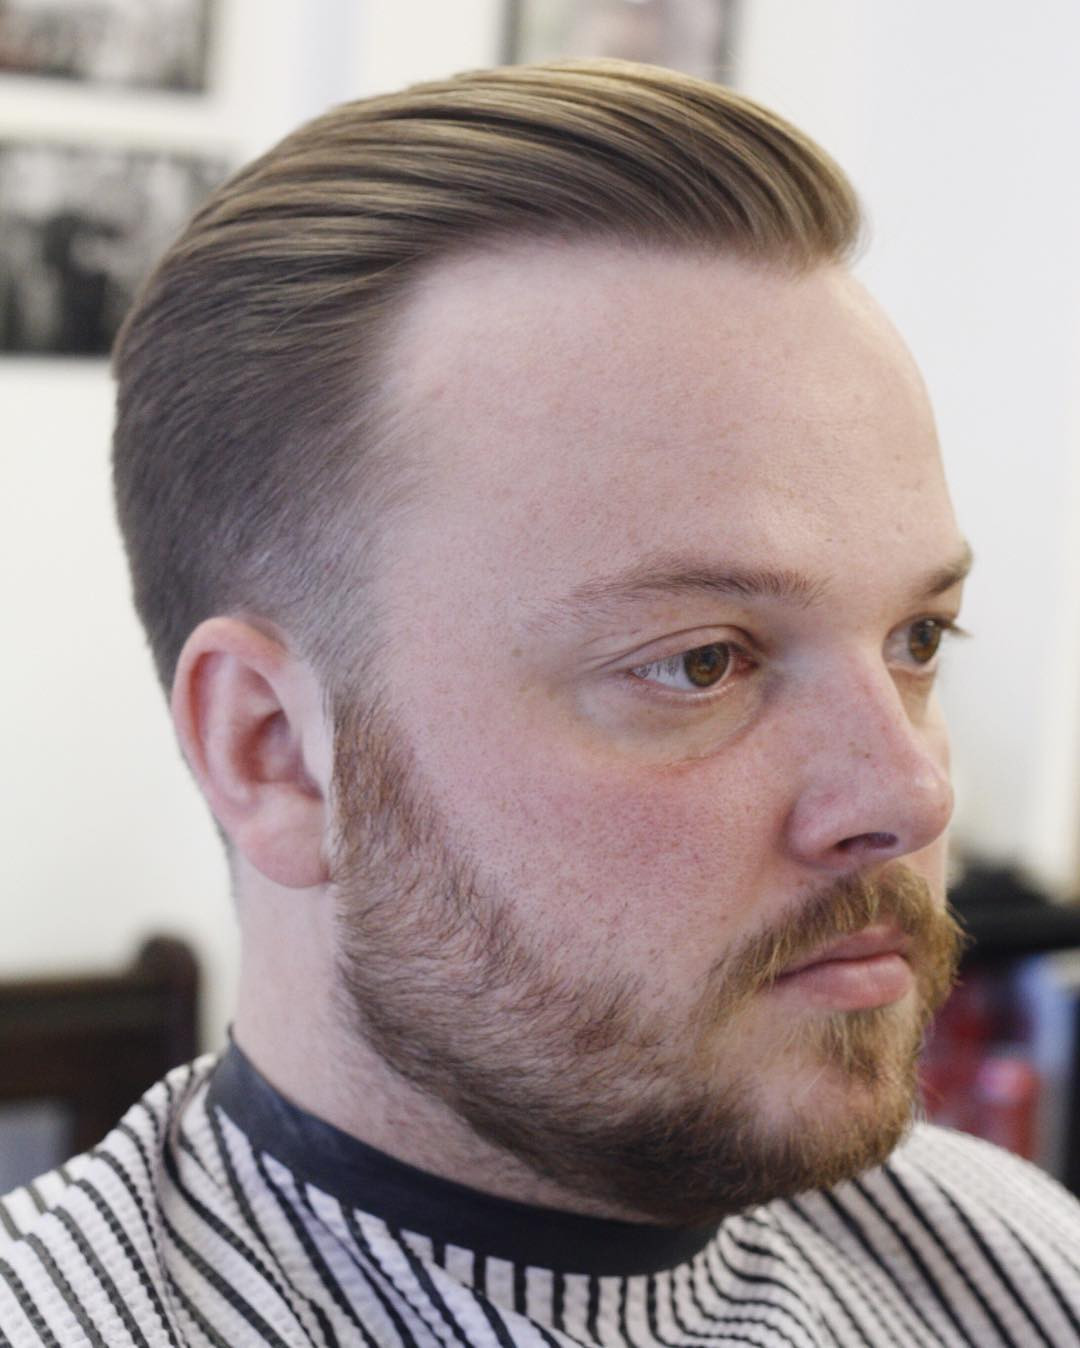 Haircuts For Receding Hairline Male
 Top 16 Cool Men s Hairstyles for Receding Hairline